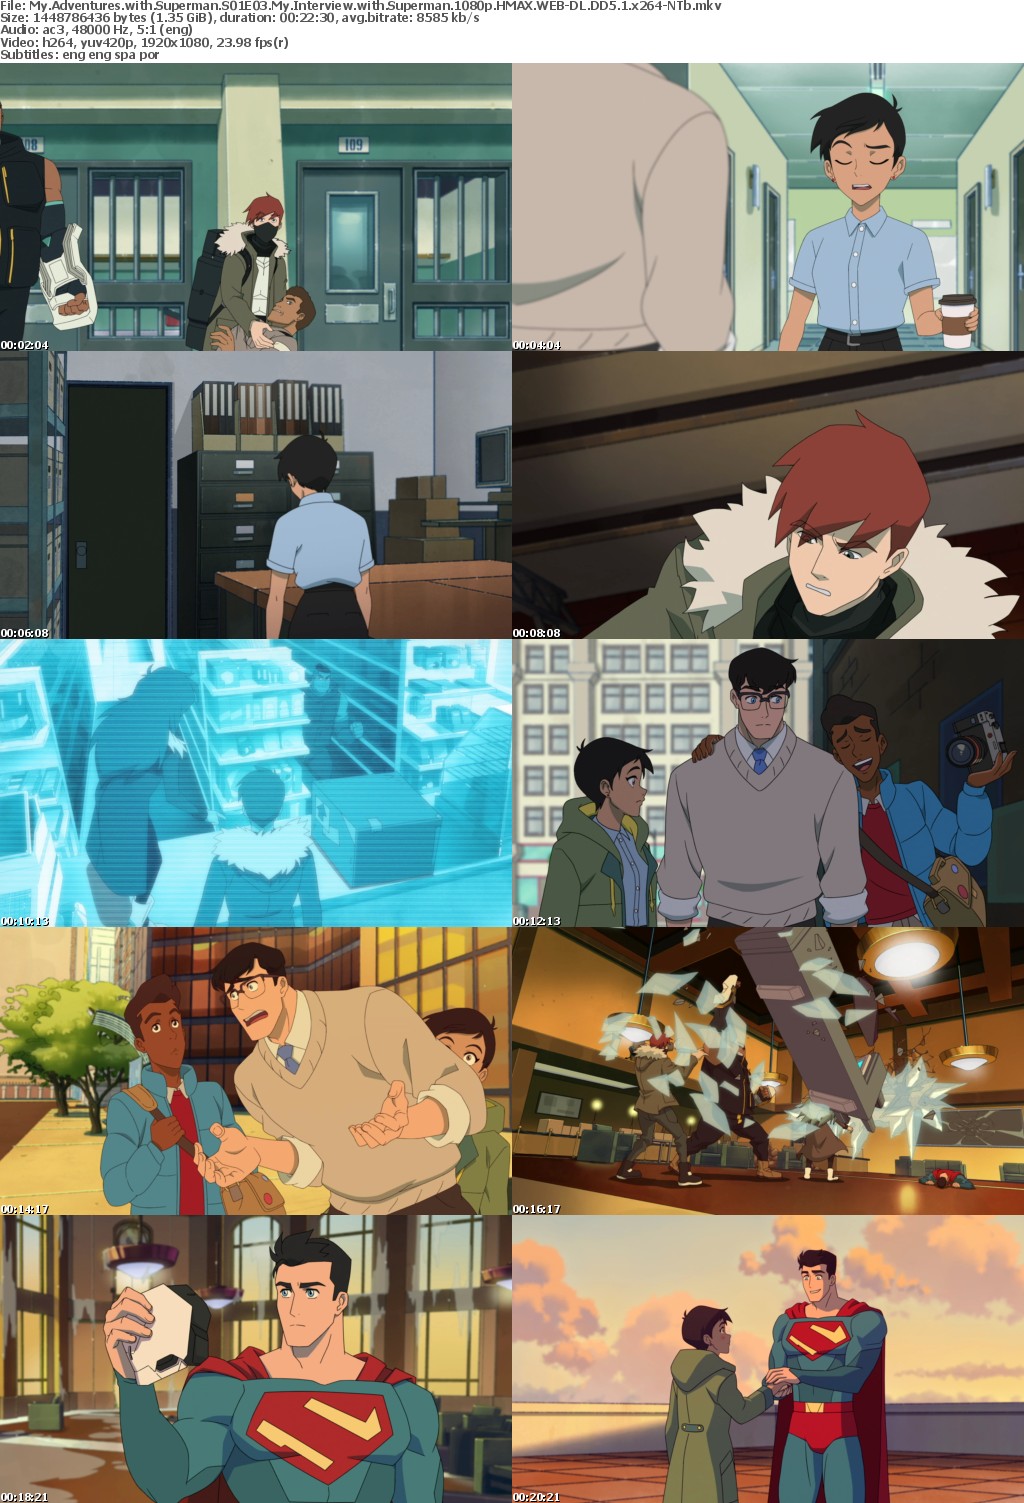 My Adventures with Superman S01E03 My Interview with Superman 1080p HMAX WEB-DL DD5 1 x264-NTb